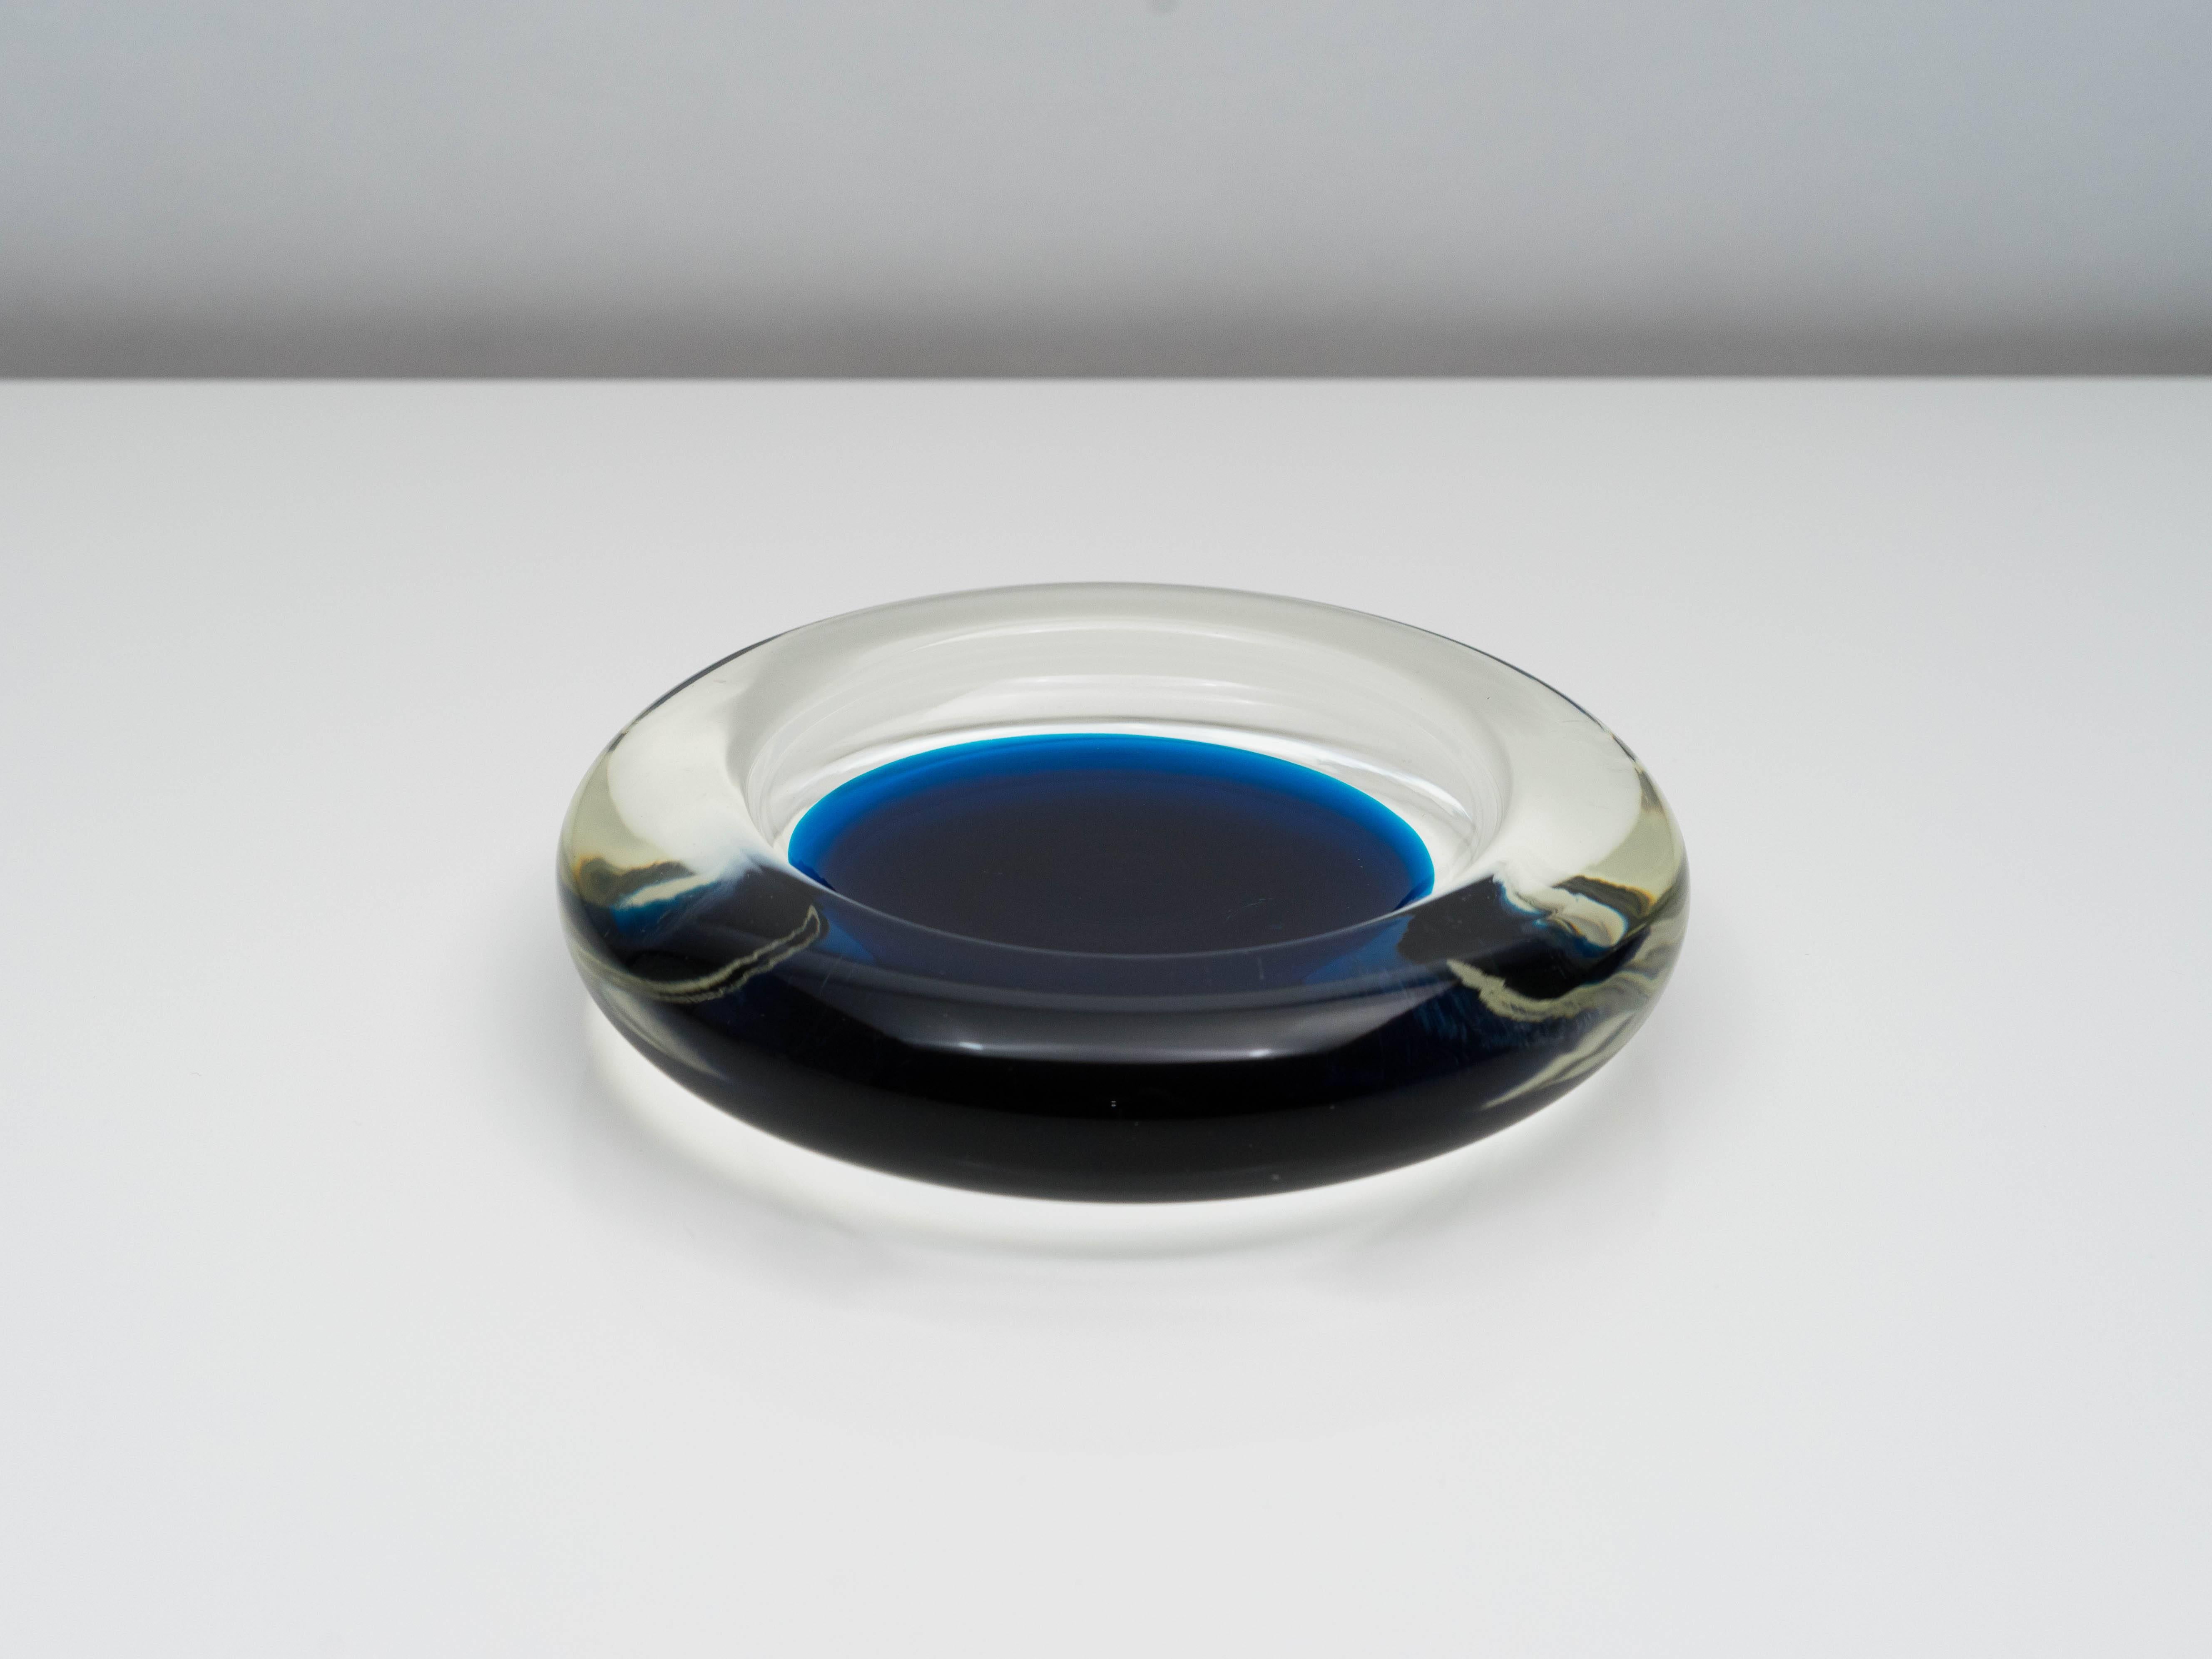 Beautiful large blue and clear glass ashtray or dish designed by Ludovico Diaz de Santillana for Venini's collaboration with Pierre Cardin in 1968-1970. This example was produced in 1980.